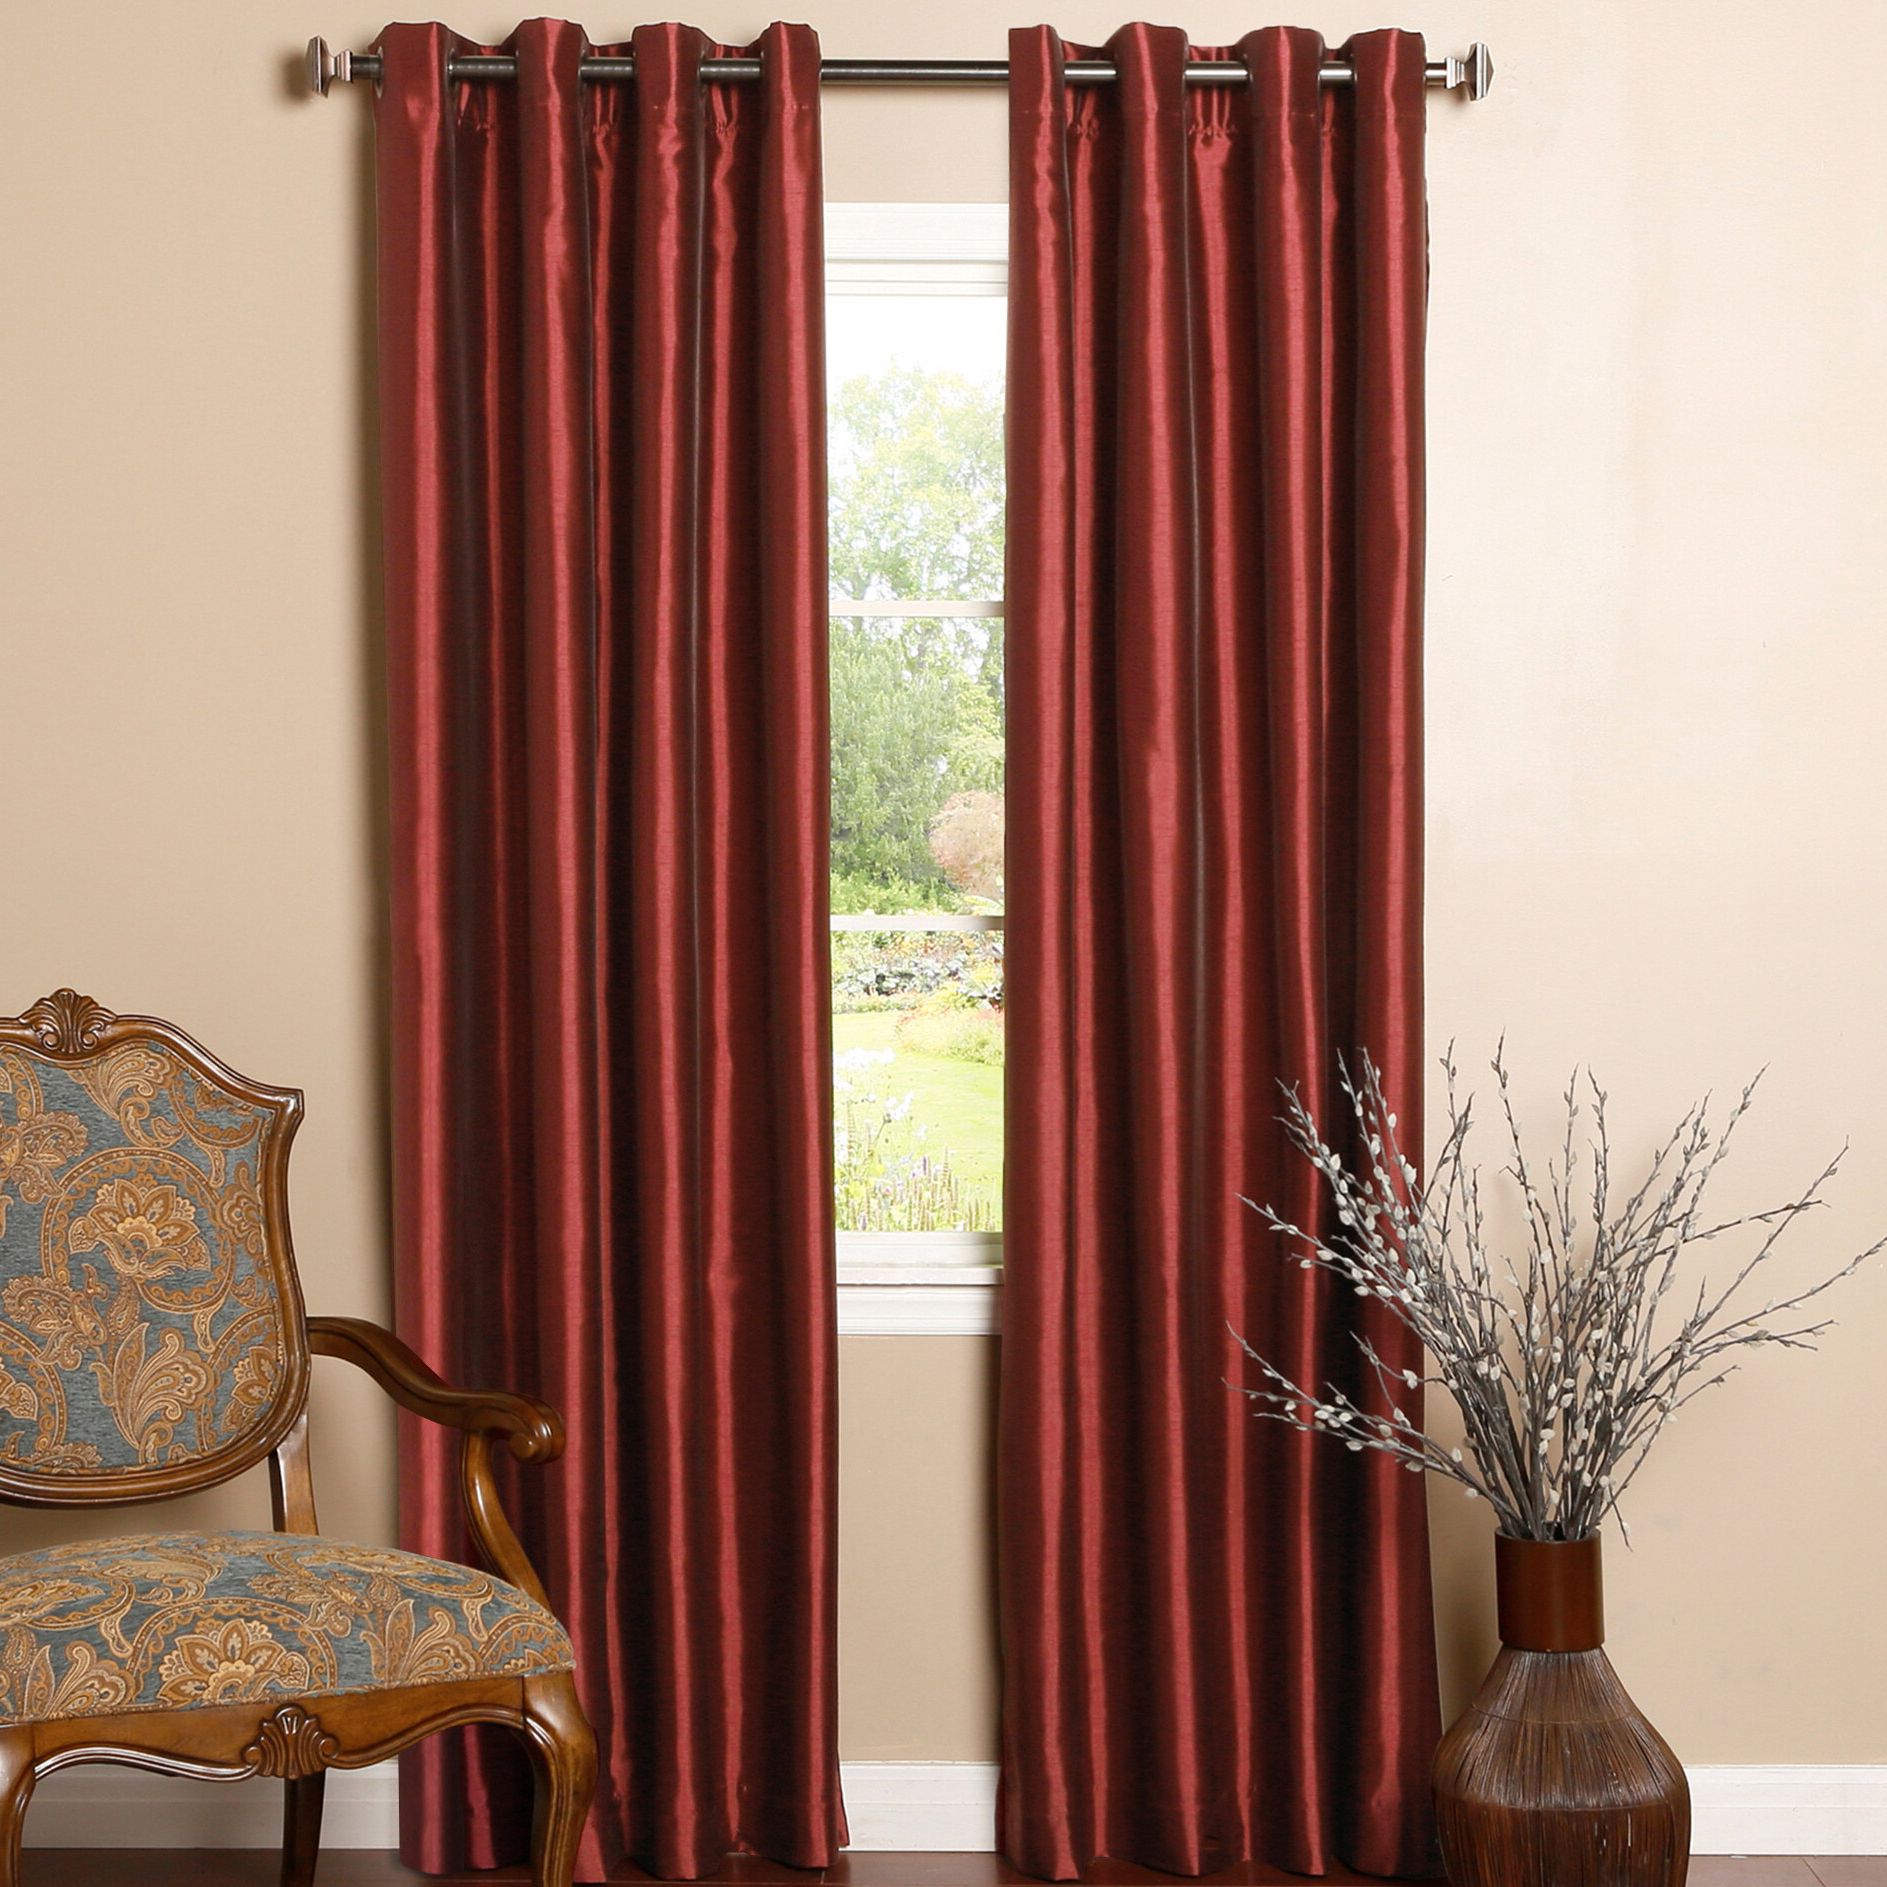 Astoria Grand Alcalde Striped Faux Solid Blackout Thermal Regarding Most Recent Luxury Collection Faux Leather Blackout Single Curtain Panels (View 12 of 20)